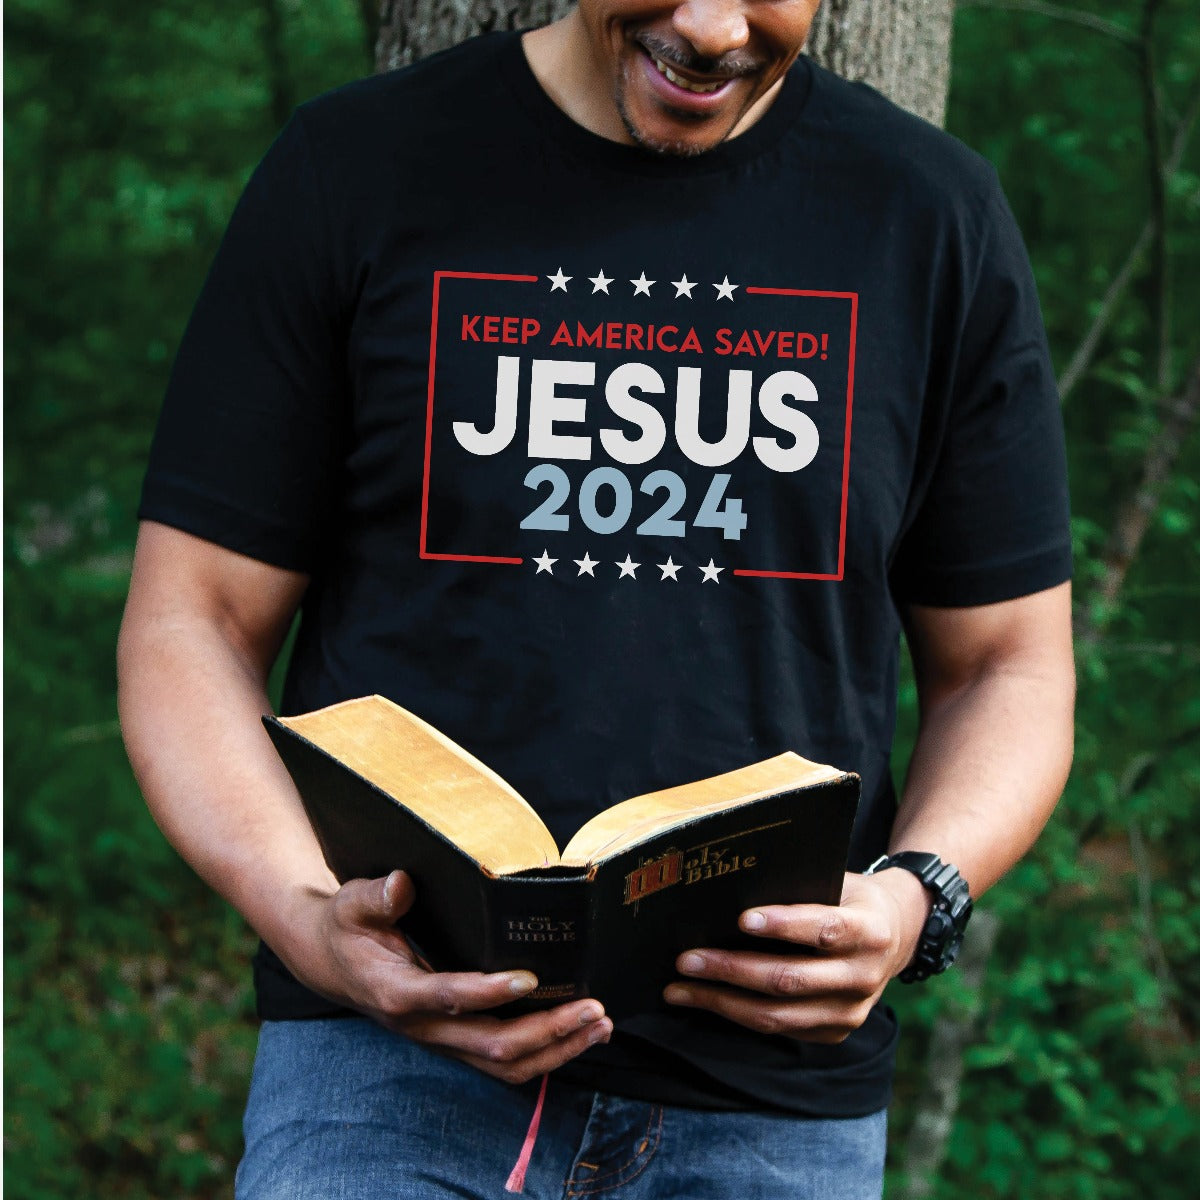 Patriotic man reading the bible wearing white President election vote unisex Christian t-shirt with "Jesus 2024 - Keep America Saved" and stars printed in bold red, white, and blue fonts, made in the USA, made for men and women God & Country Patriots